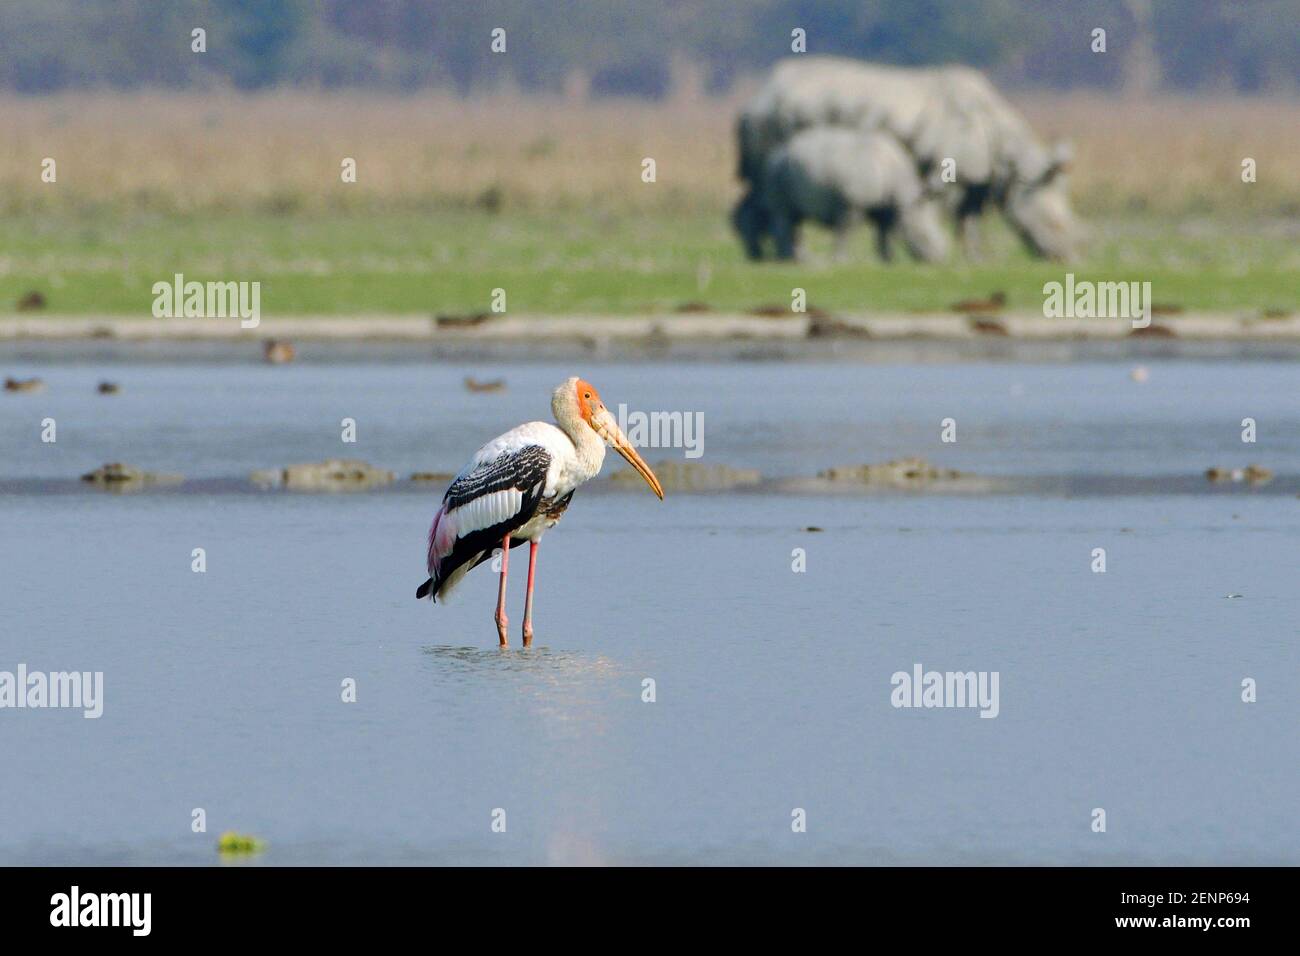 Painted Stork Bird Is Standing In The Wetland Stock Photo